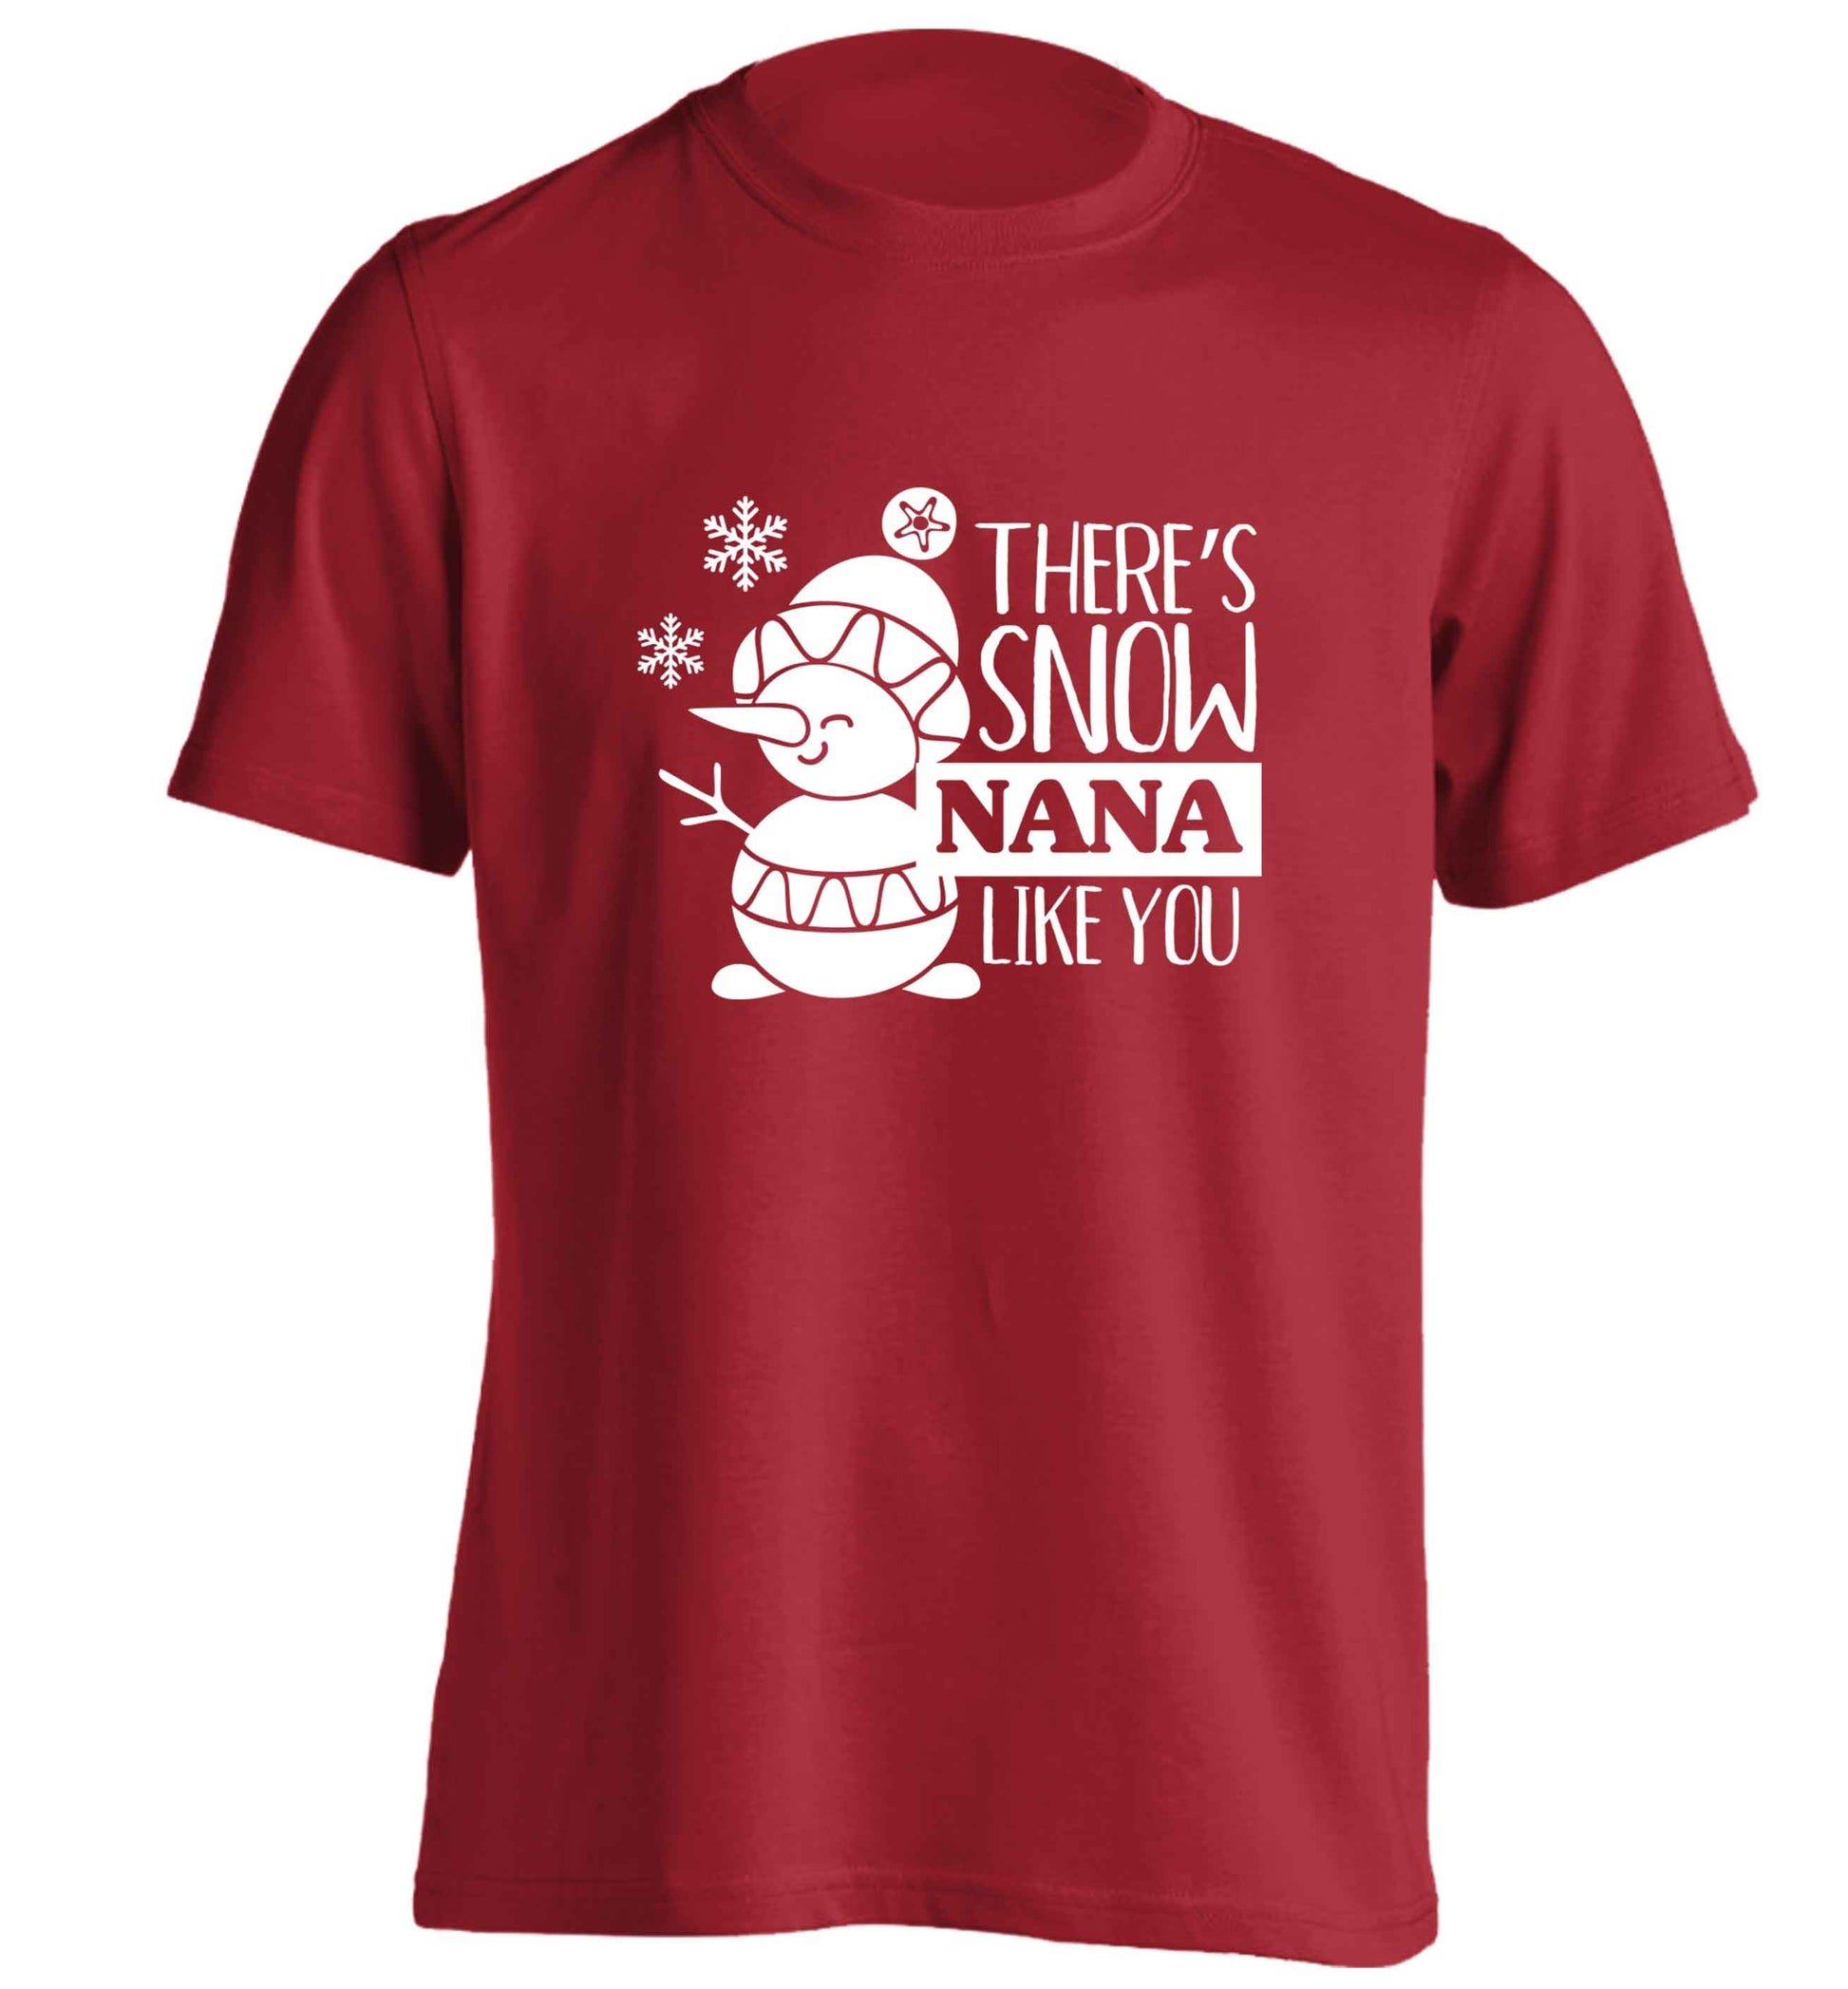 There's snow nana like you adults unisex red Tshirt 2XL